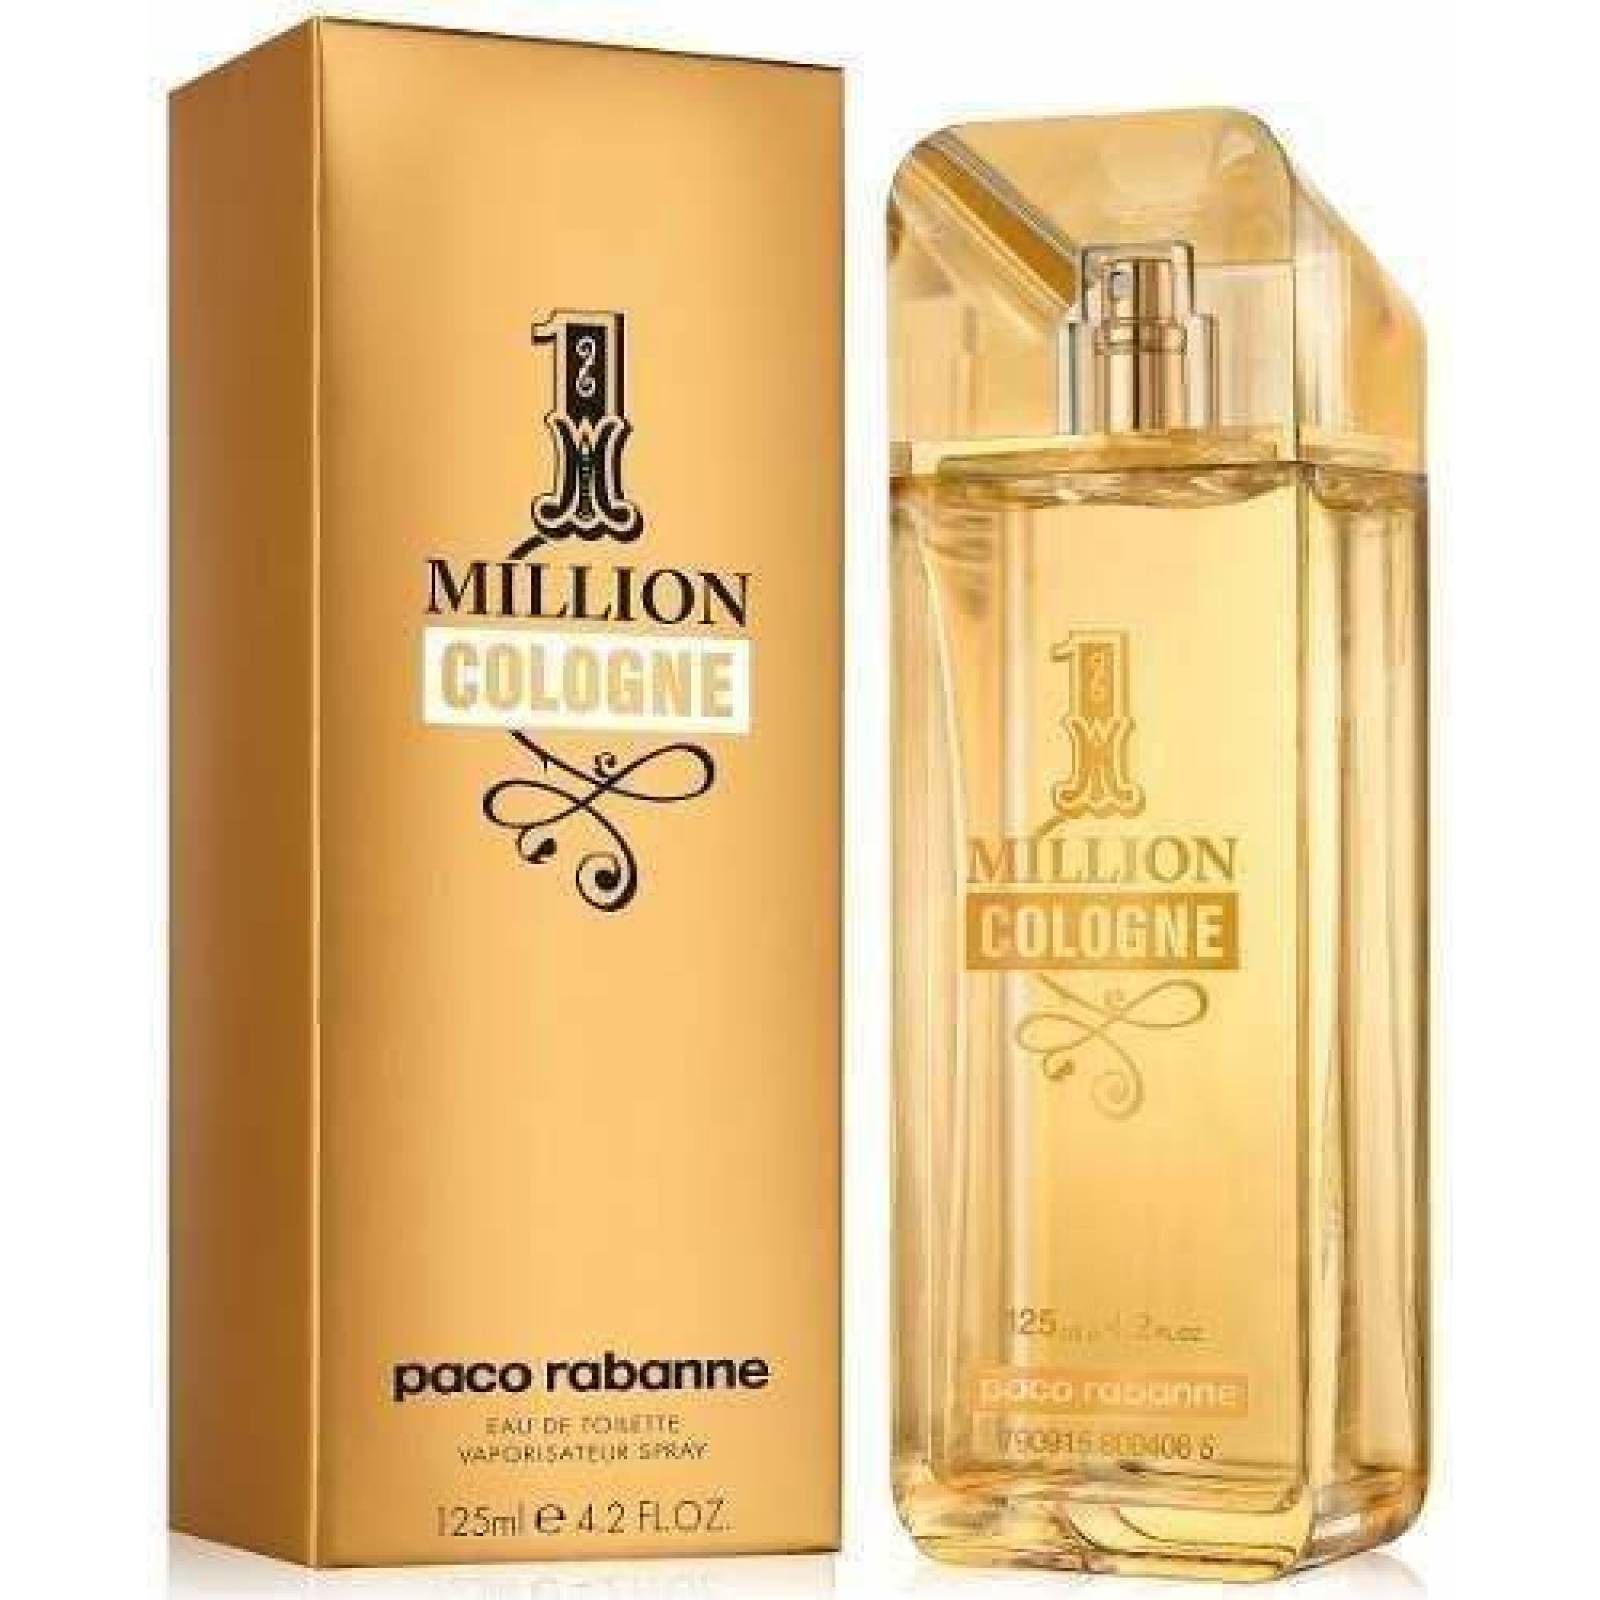 One Millions Cologne Caballero 125 Ml Paco Rabanne